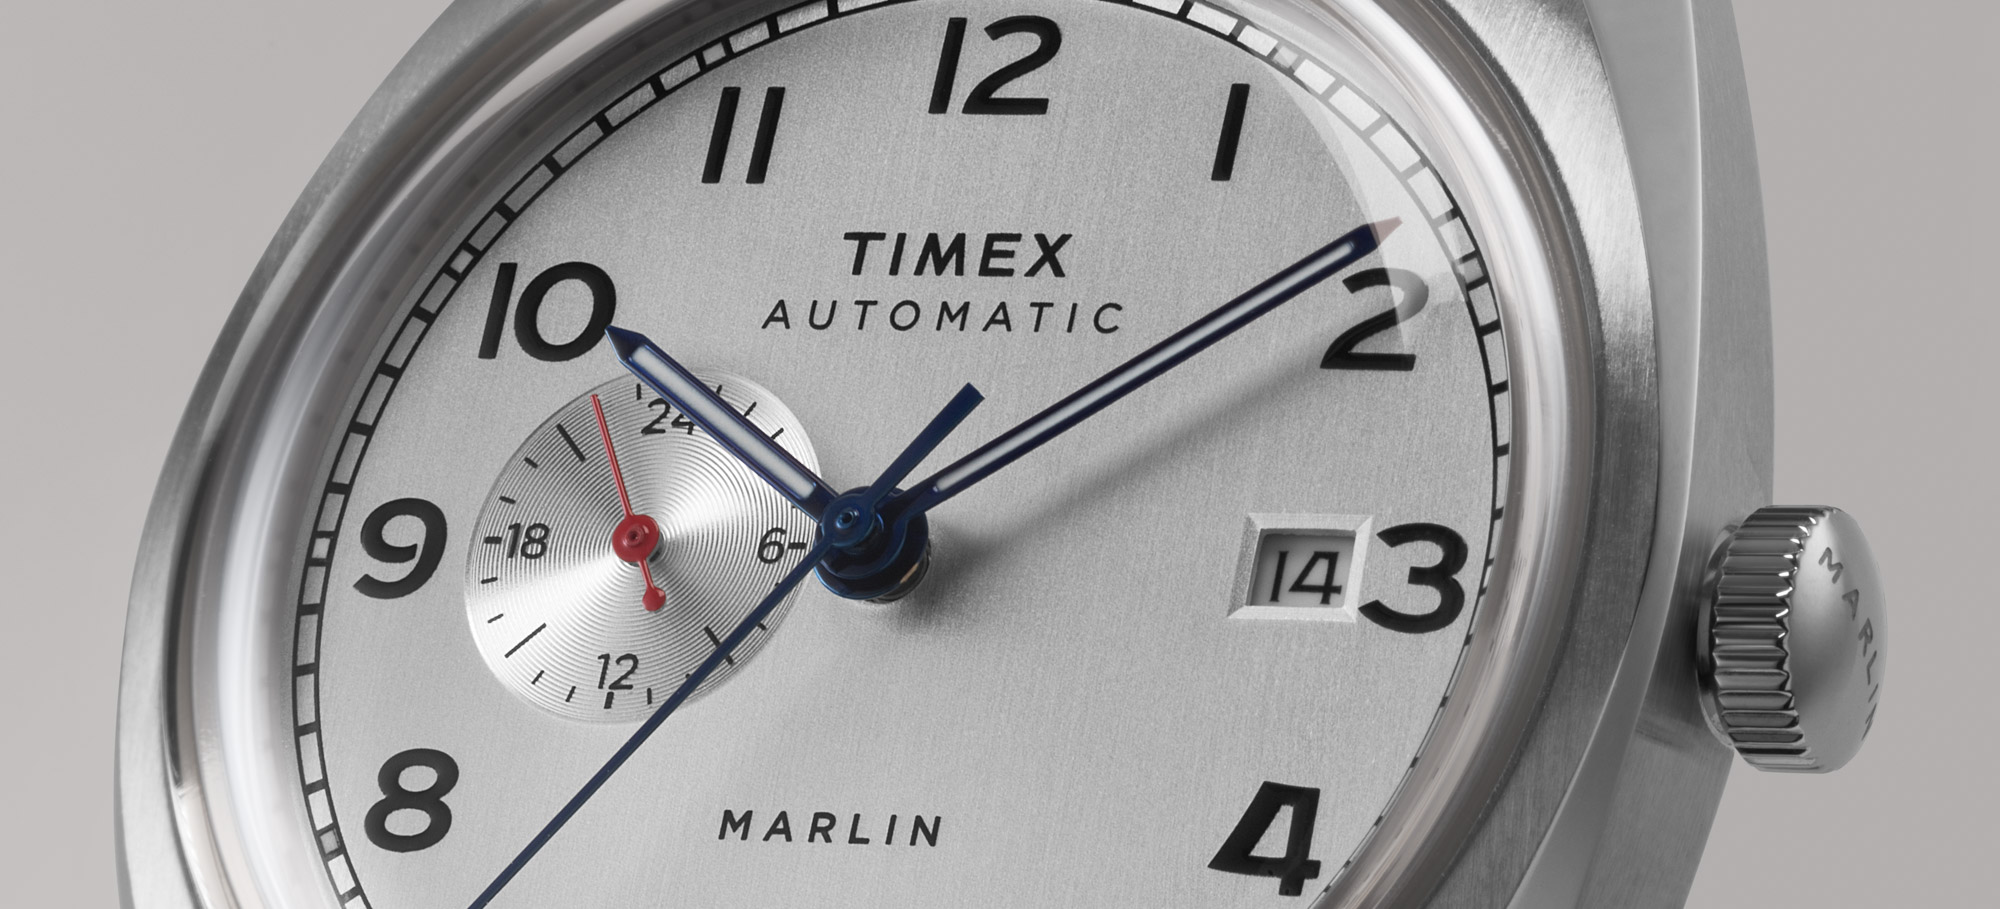 Introducing The Accessible Timex Marlin Sub-Dial Automatic | arnoticias.tv